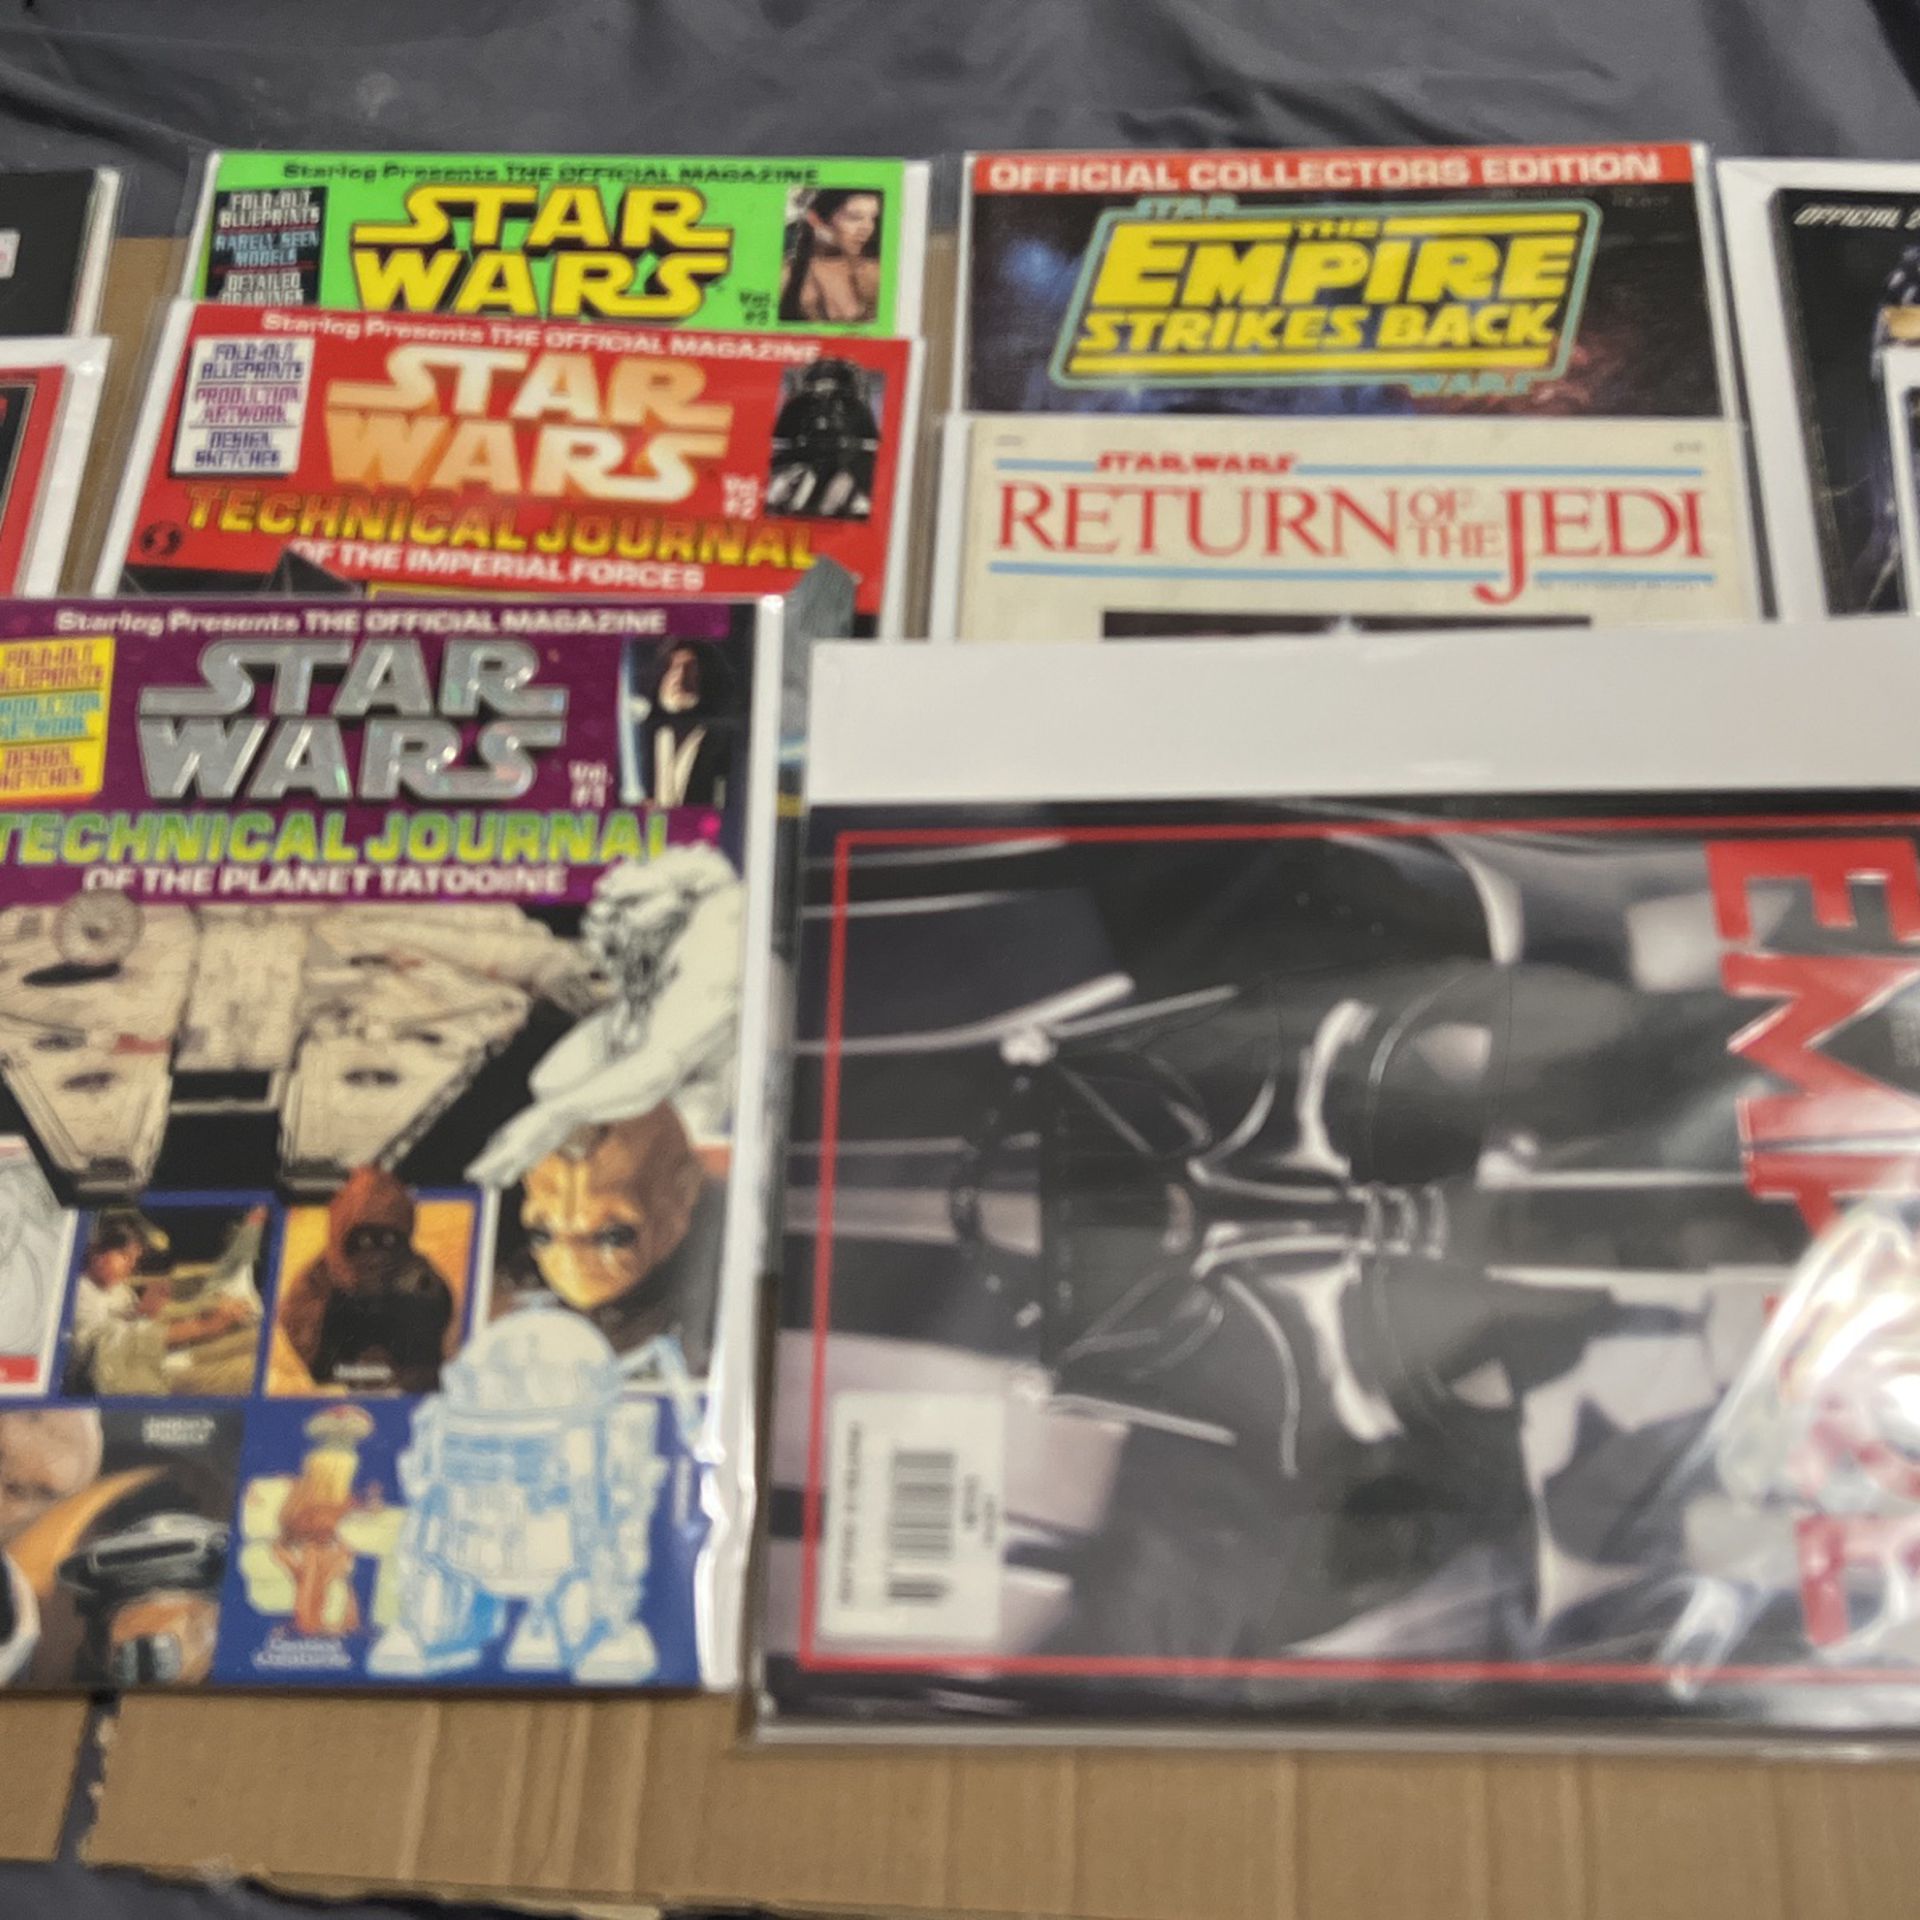 Star Wars Magazine And Collectors Editions 11 Total Bagged And Boarded $50